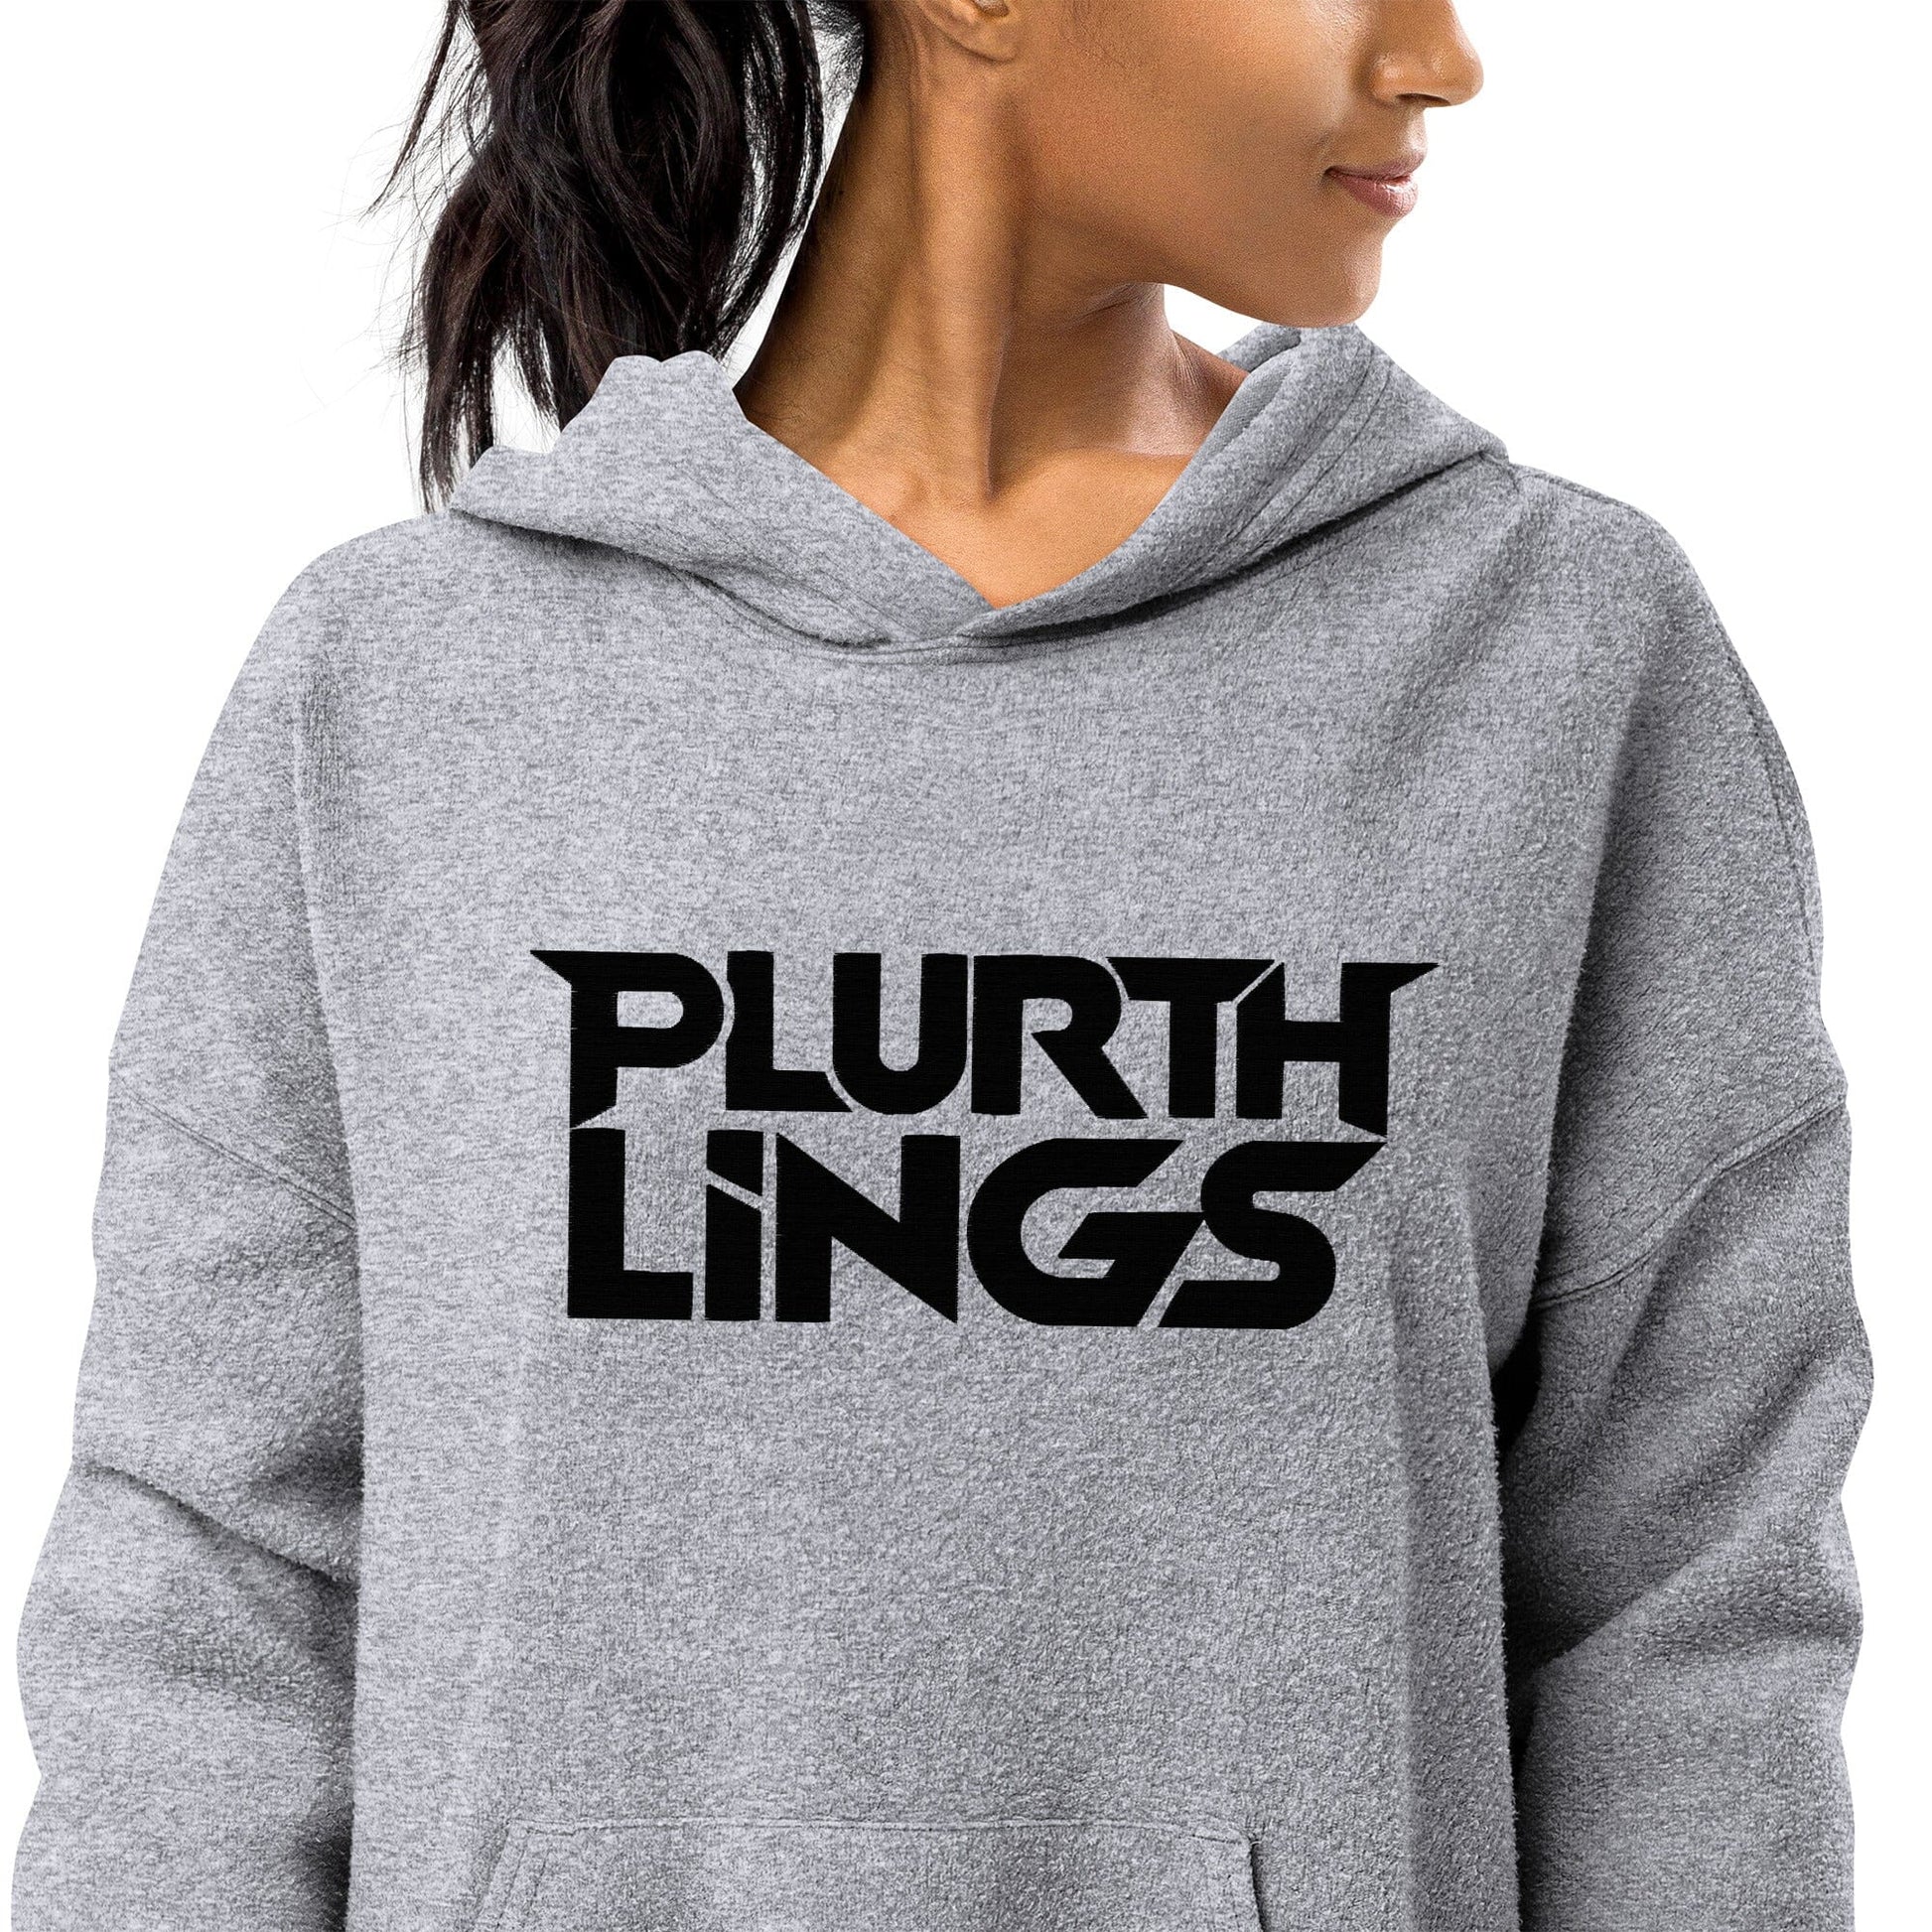 Plurthlings Embroidered Logo Eco-Sueded Fleece Hoodie PLURTHLINGS Athletic Heather XS 